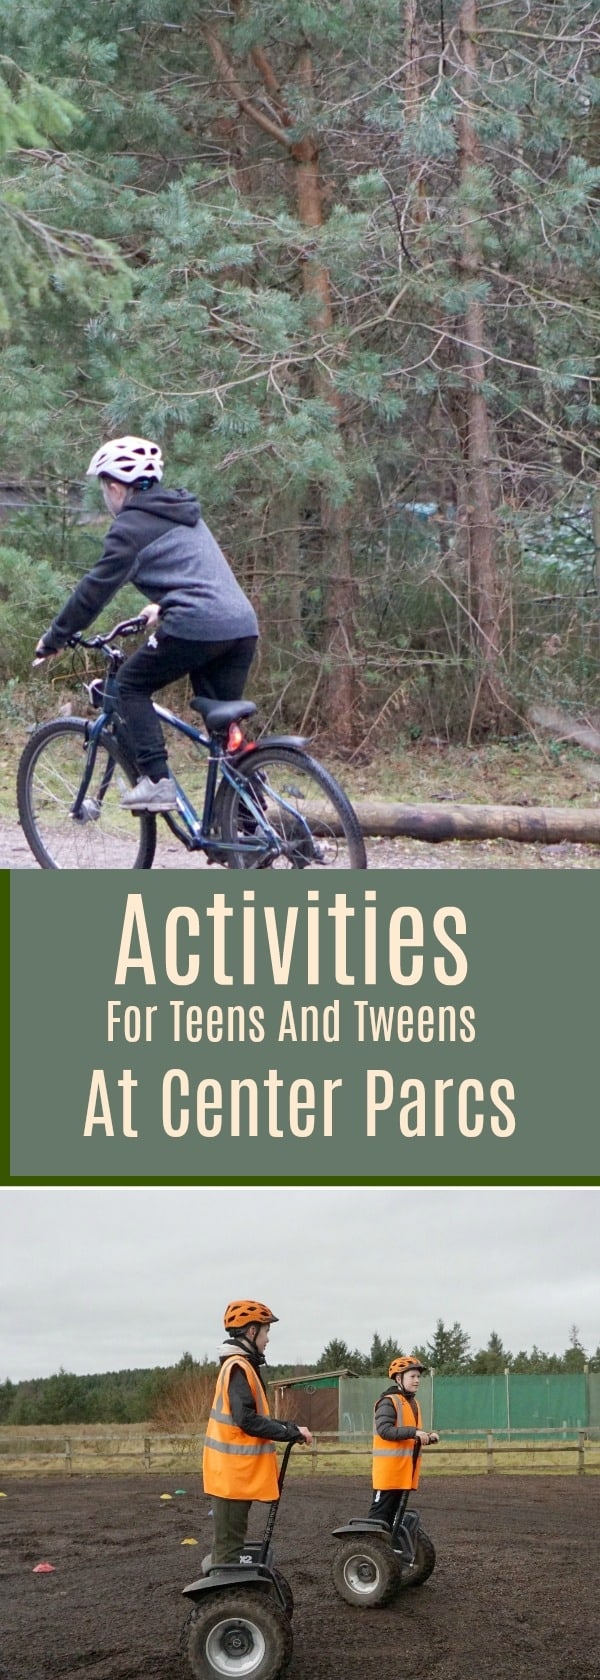 Activities For Teens And Tweens At Center Parcs, Including Adrenaline Activities such a climbing and zip wires, segway experience and some lower cost activities